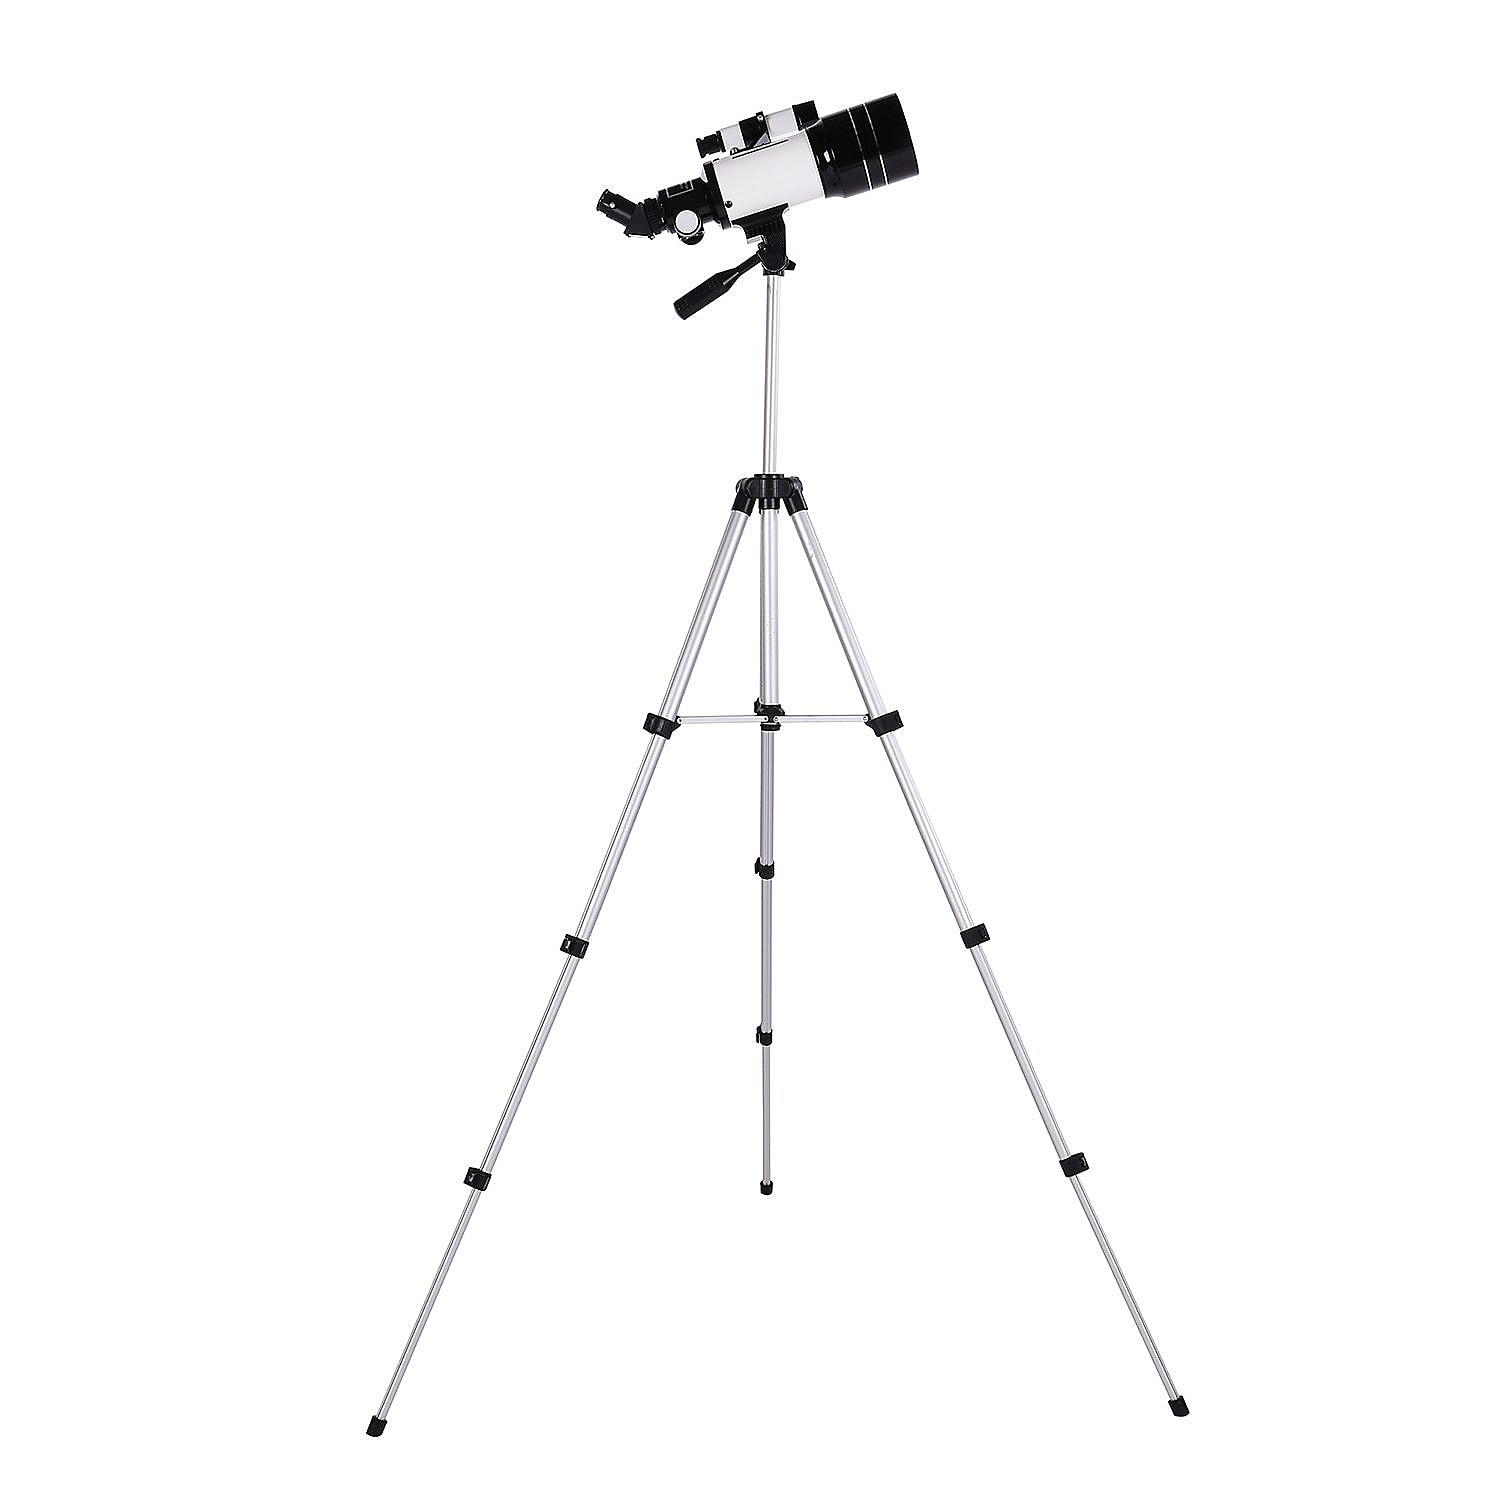 Terrestrial and Astronomical Childrens Telescope (90 Degree Prism, 70mm Refractor) - White & Black